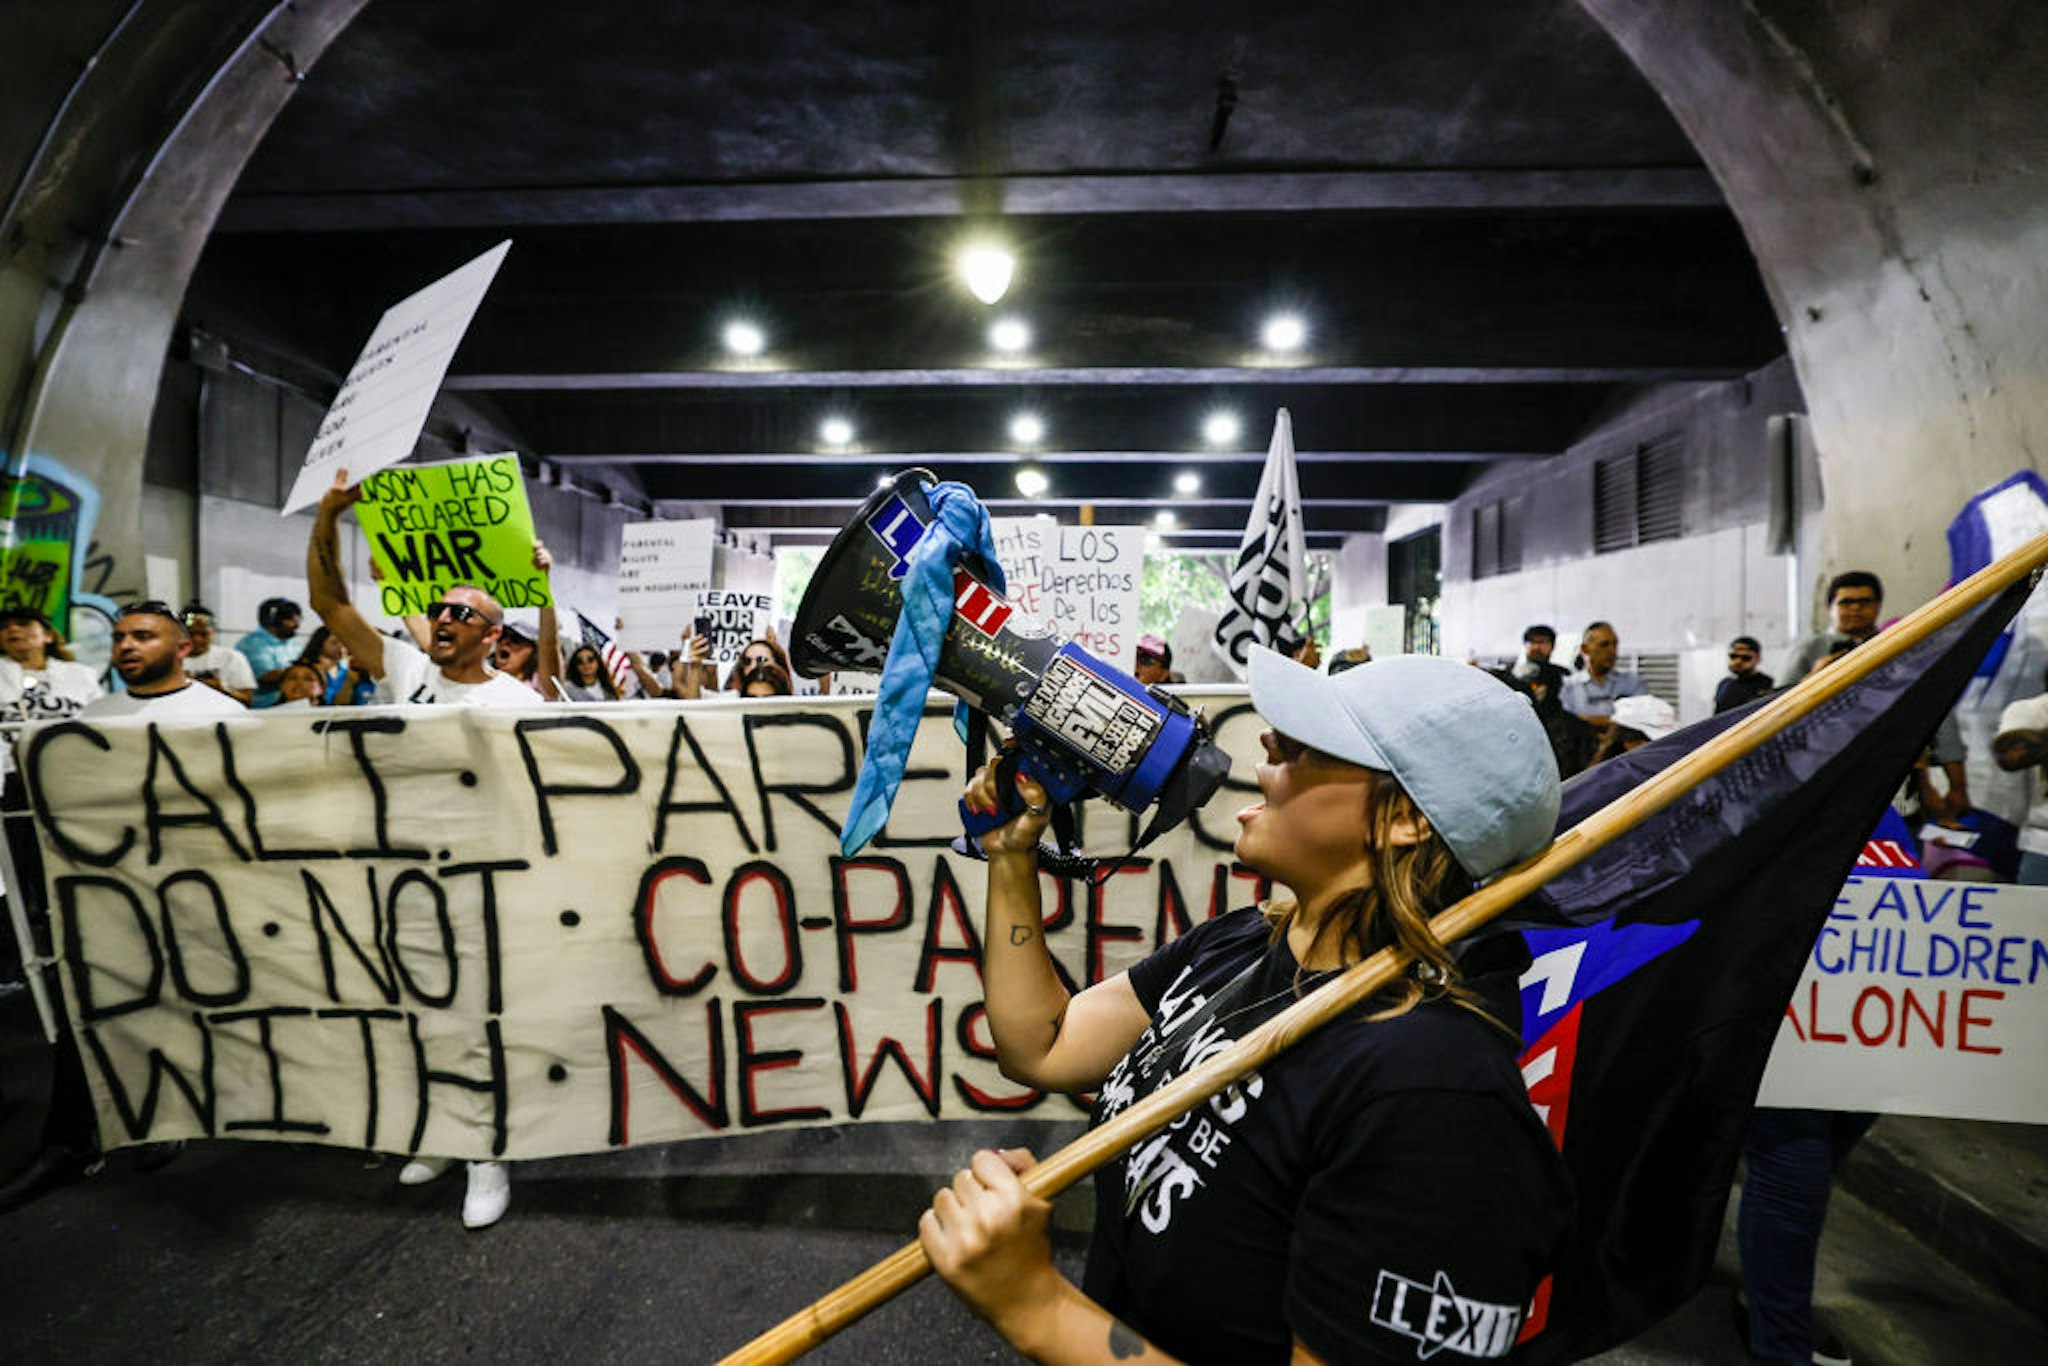 Los Angeles, CA, Tuesday, August 22, 2023 - Parents Rights protesters march under the Third St. Bridge, downtown. About 150 people marched from City Hall to LAUSD headquarters, attracting a small group of lgbtq demonstrators and police. (Robert Gauthier/Los Angeles Times via Getty Images)